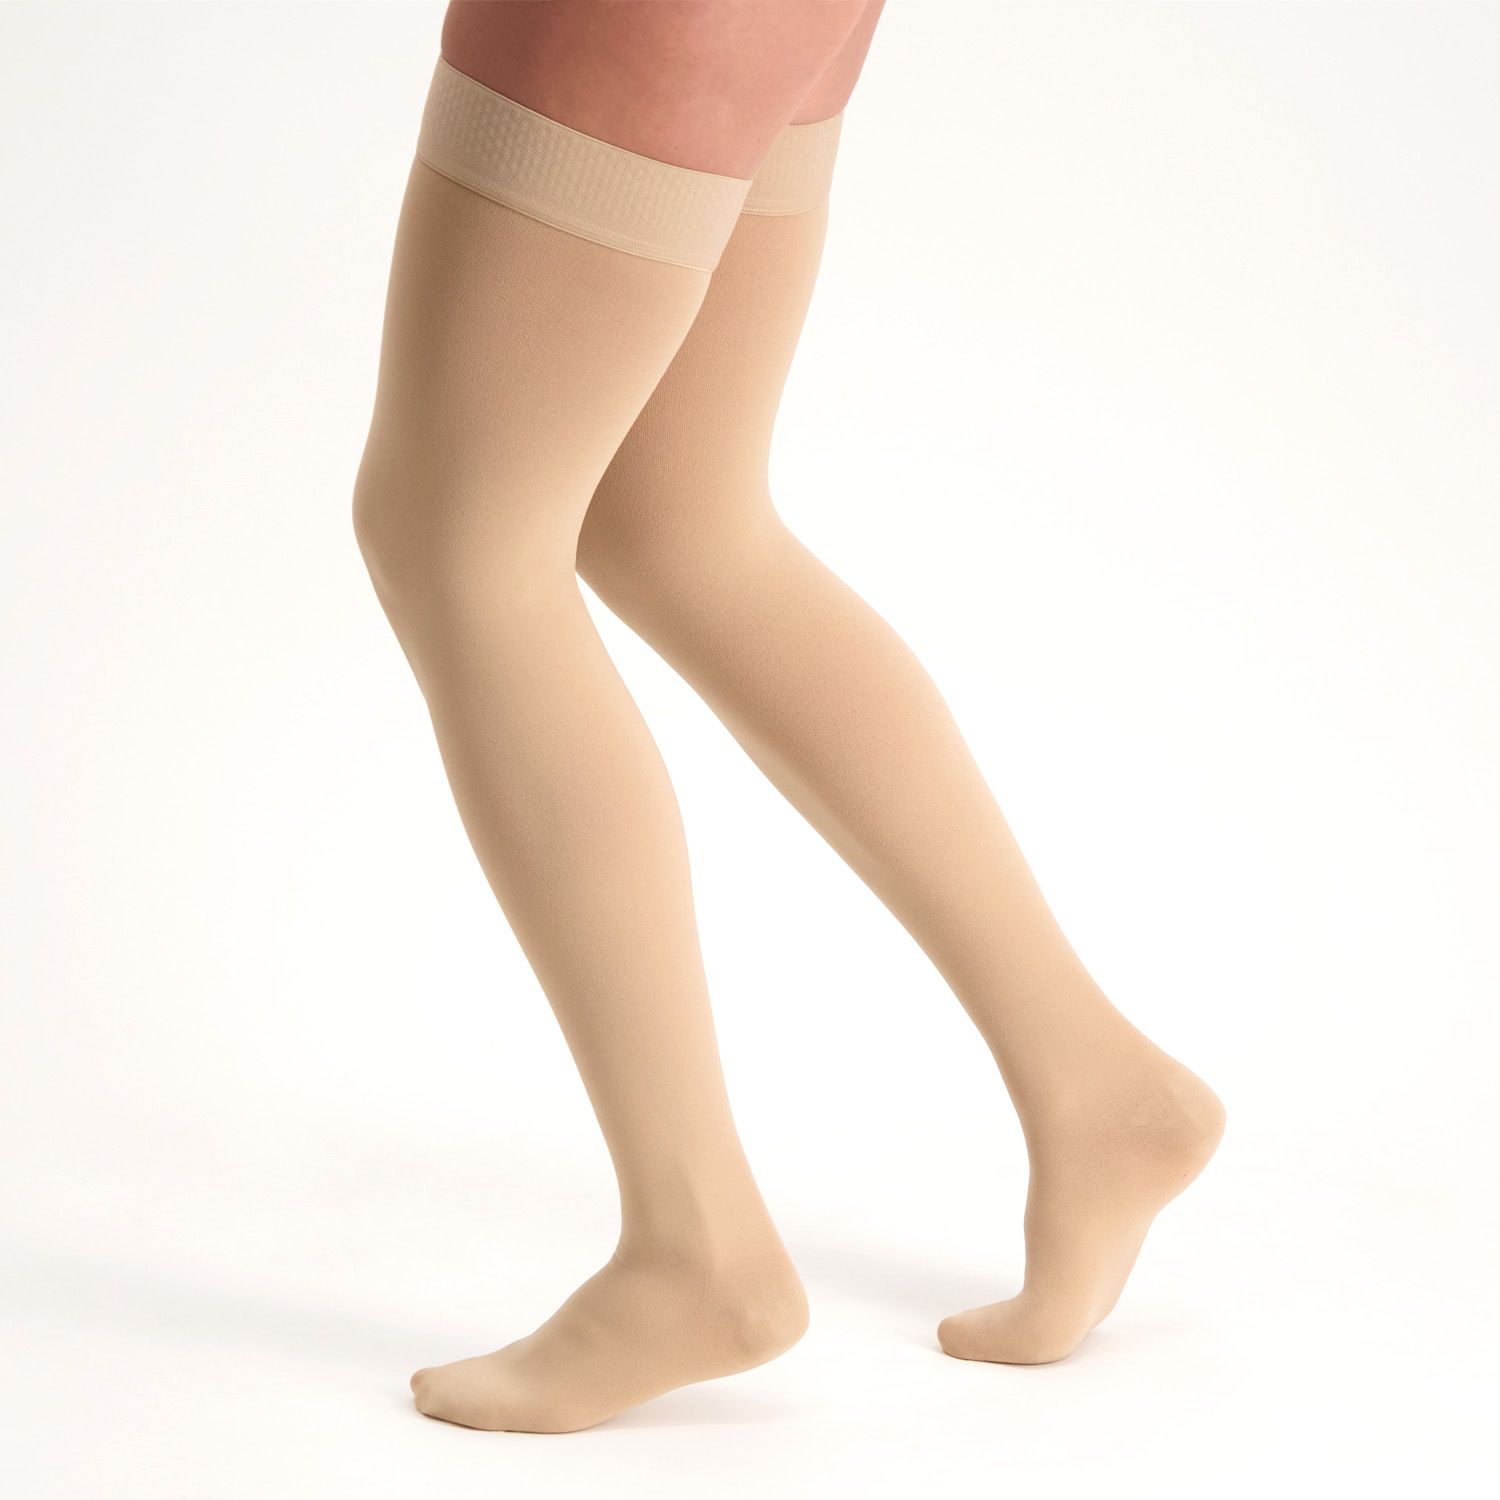 dunimed premium comfort compression stockings groin length closed toe legs